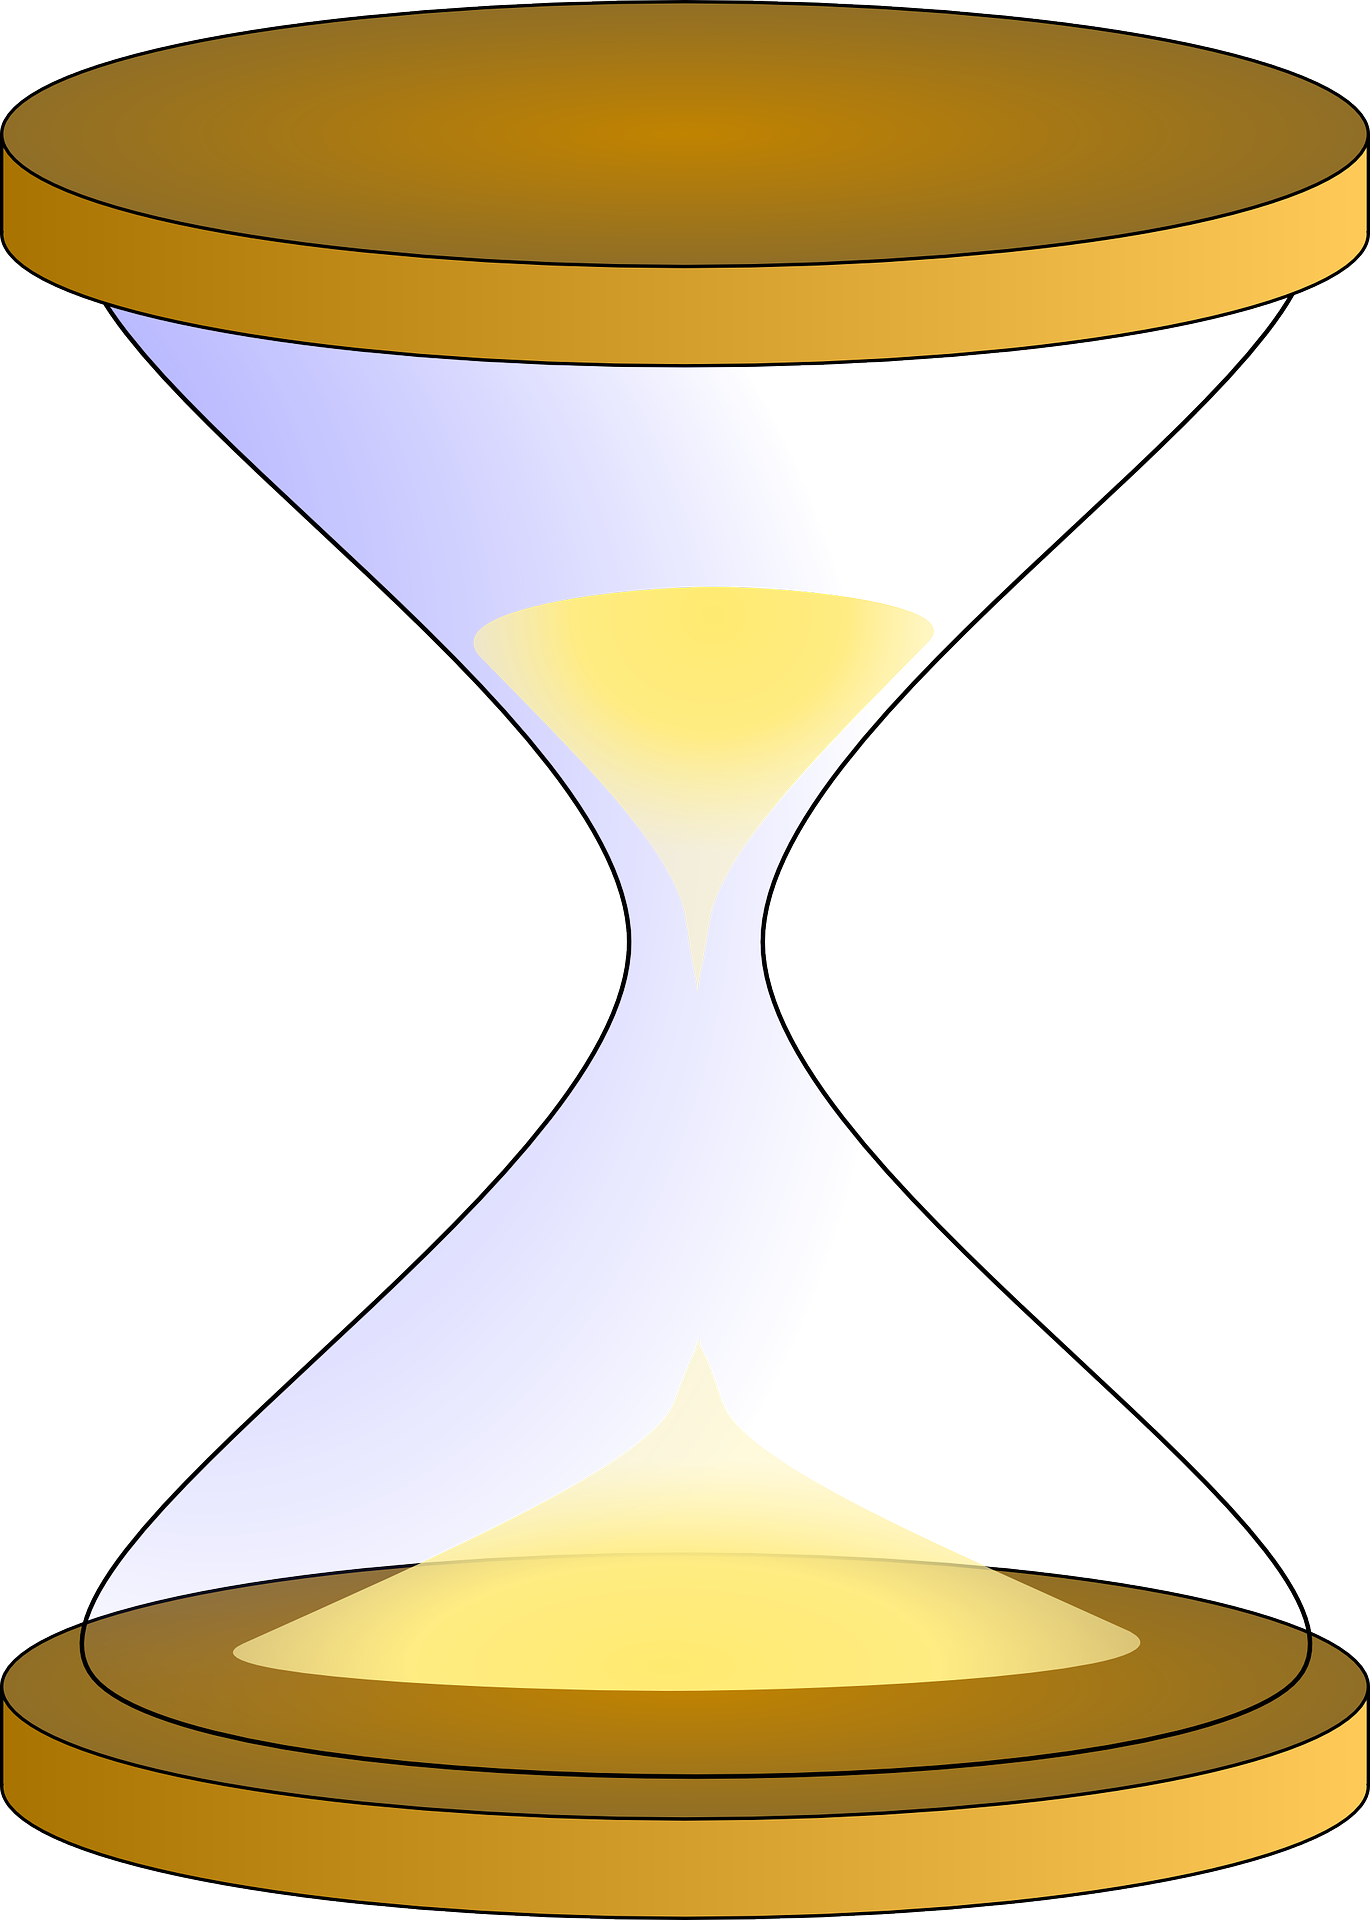 Sandglass Animated Hourglass PNG Clipart